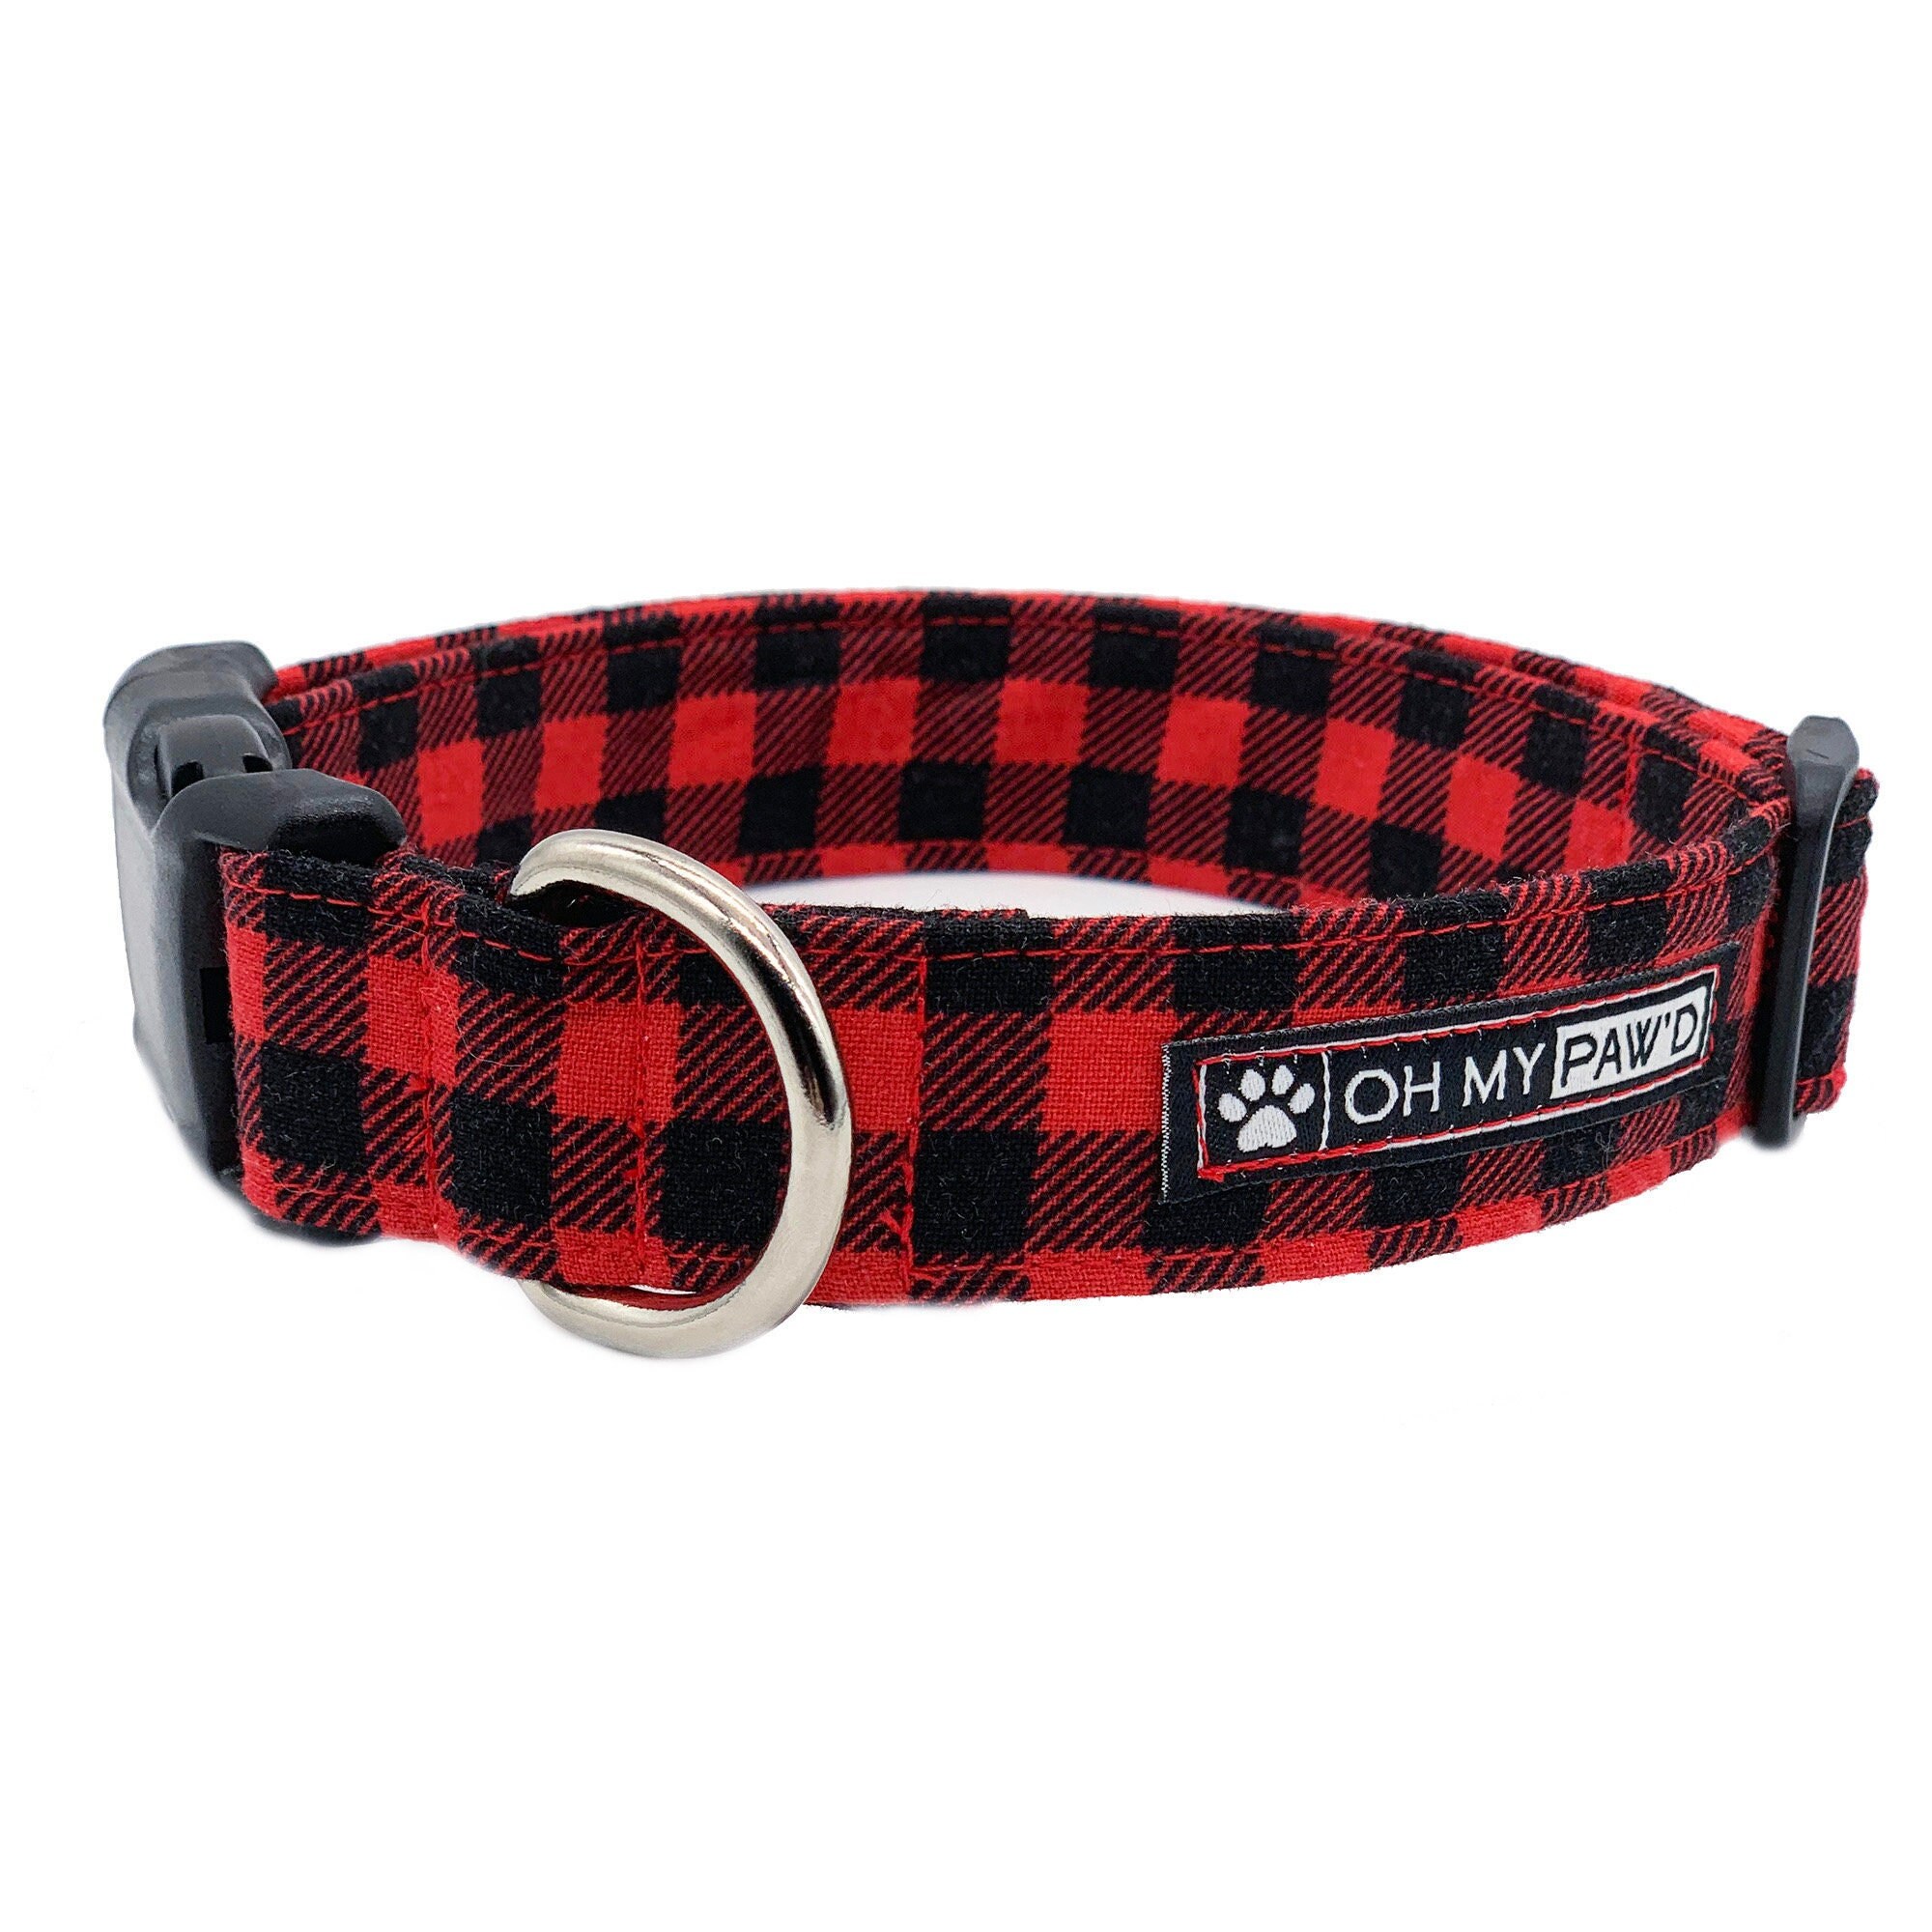 Service Dog Collar for Pets in Size Medium with Extra Width and 1 Inch Wide Long 14-20 Inches Long Hand Made Dog Collar by Oh My Paw'd 